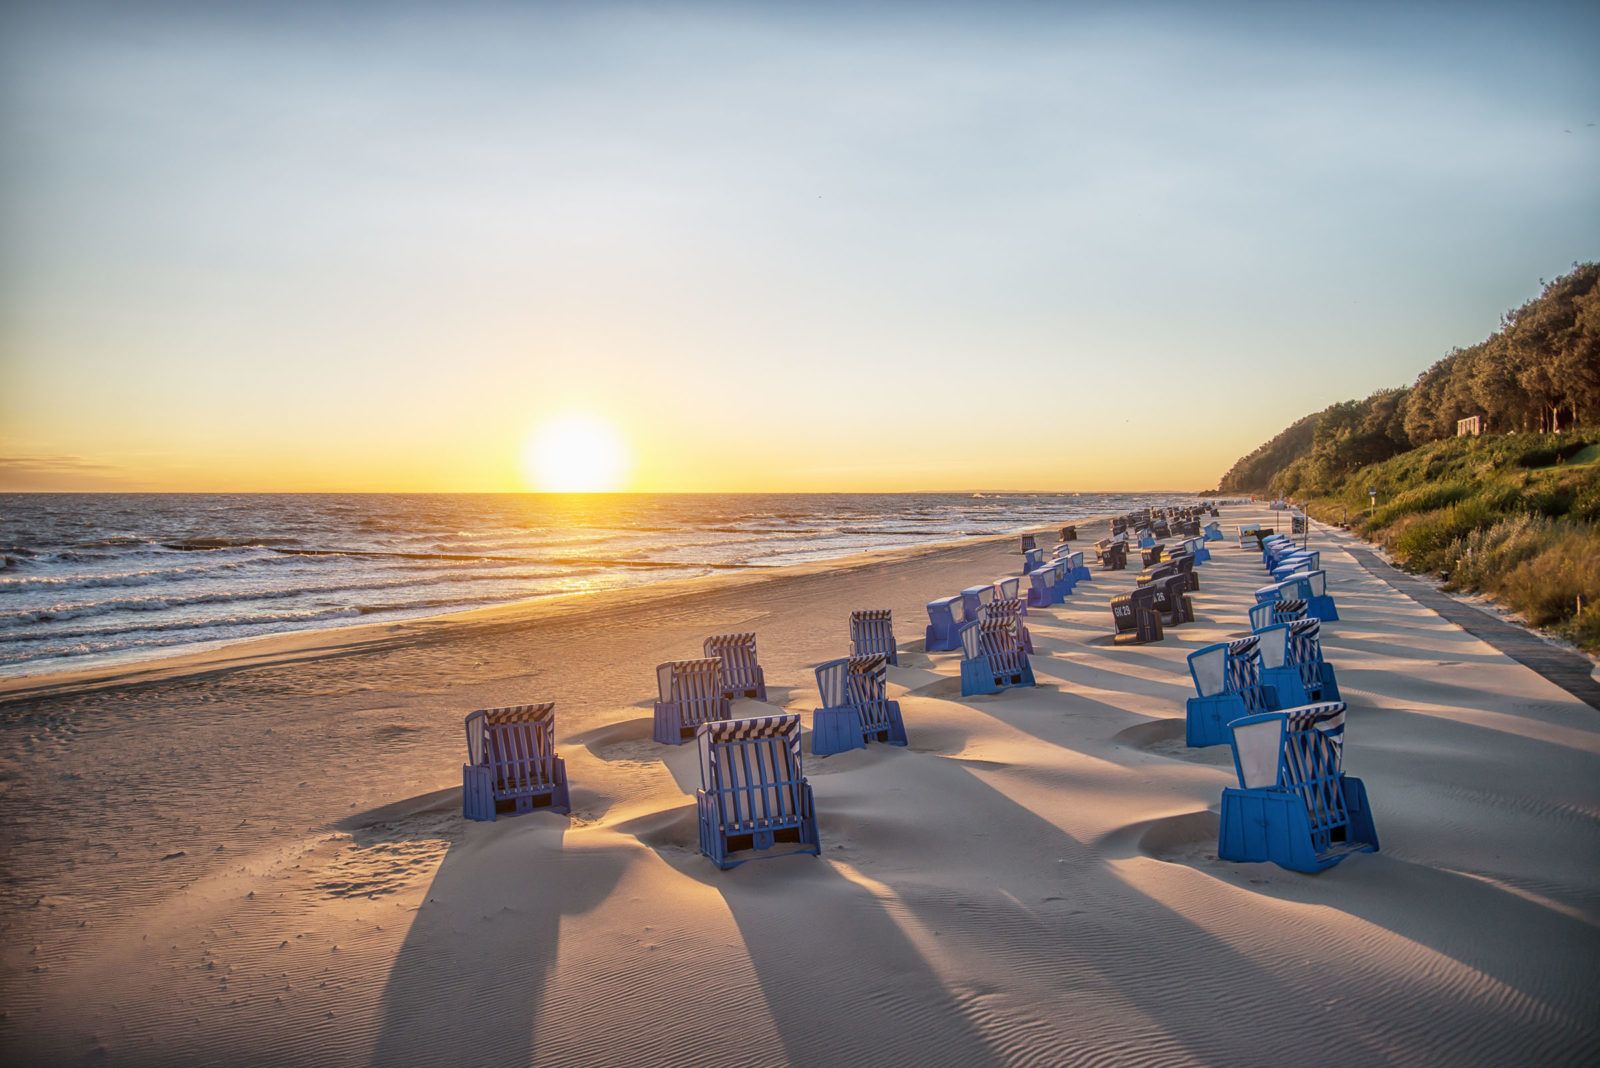 Usedom - the sunny island - Discover Germany